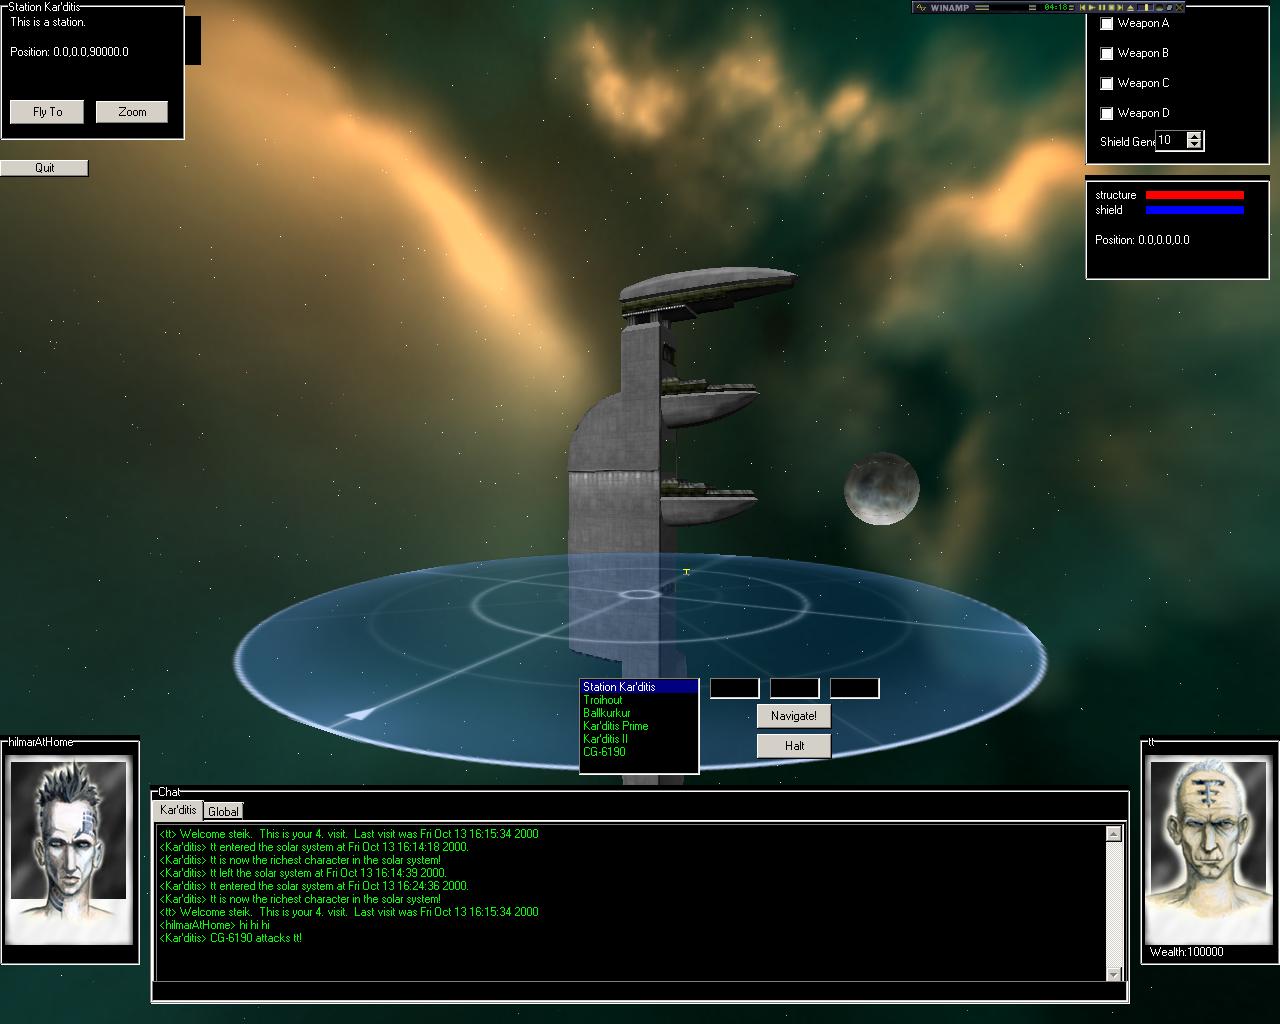 EVE Online Year 2000